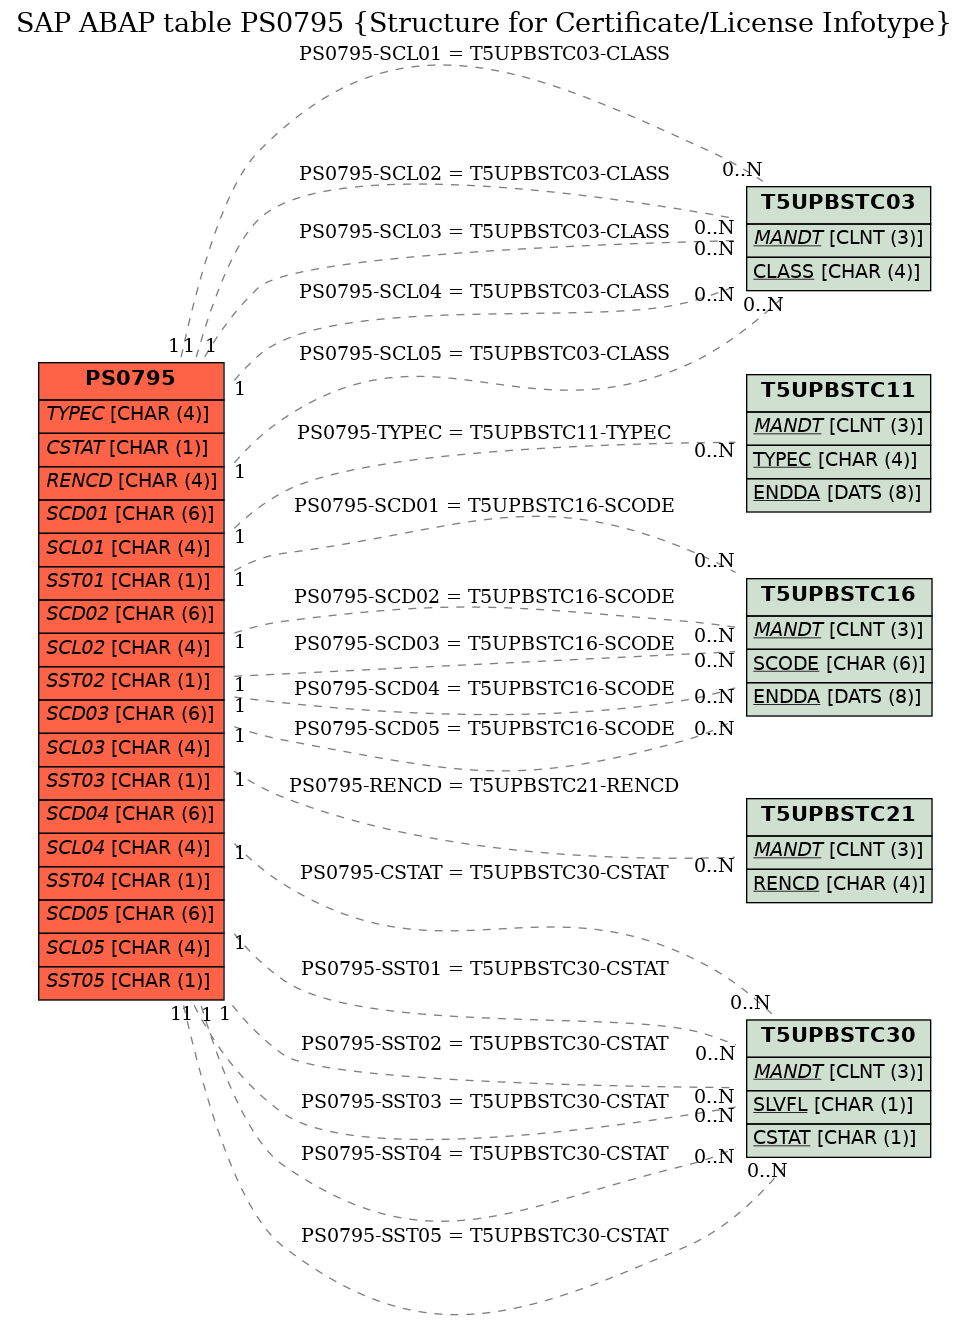 E-R Diagram for table PS0795 (Structure for Certificate/License Infotype)